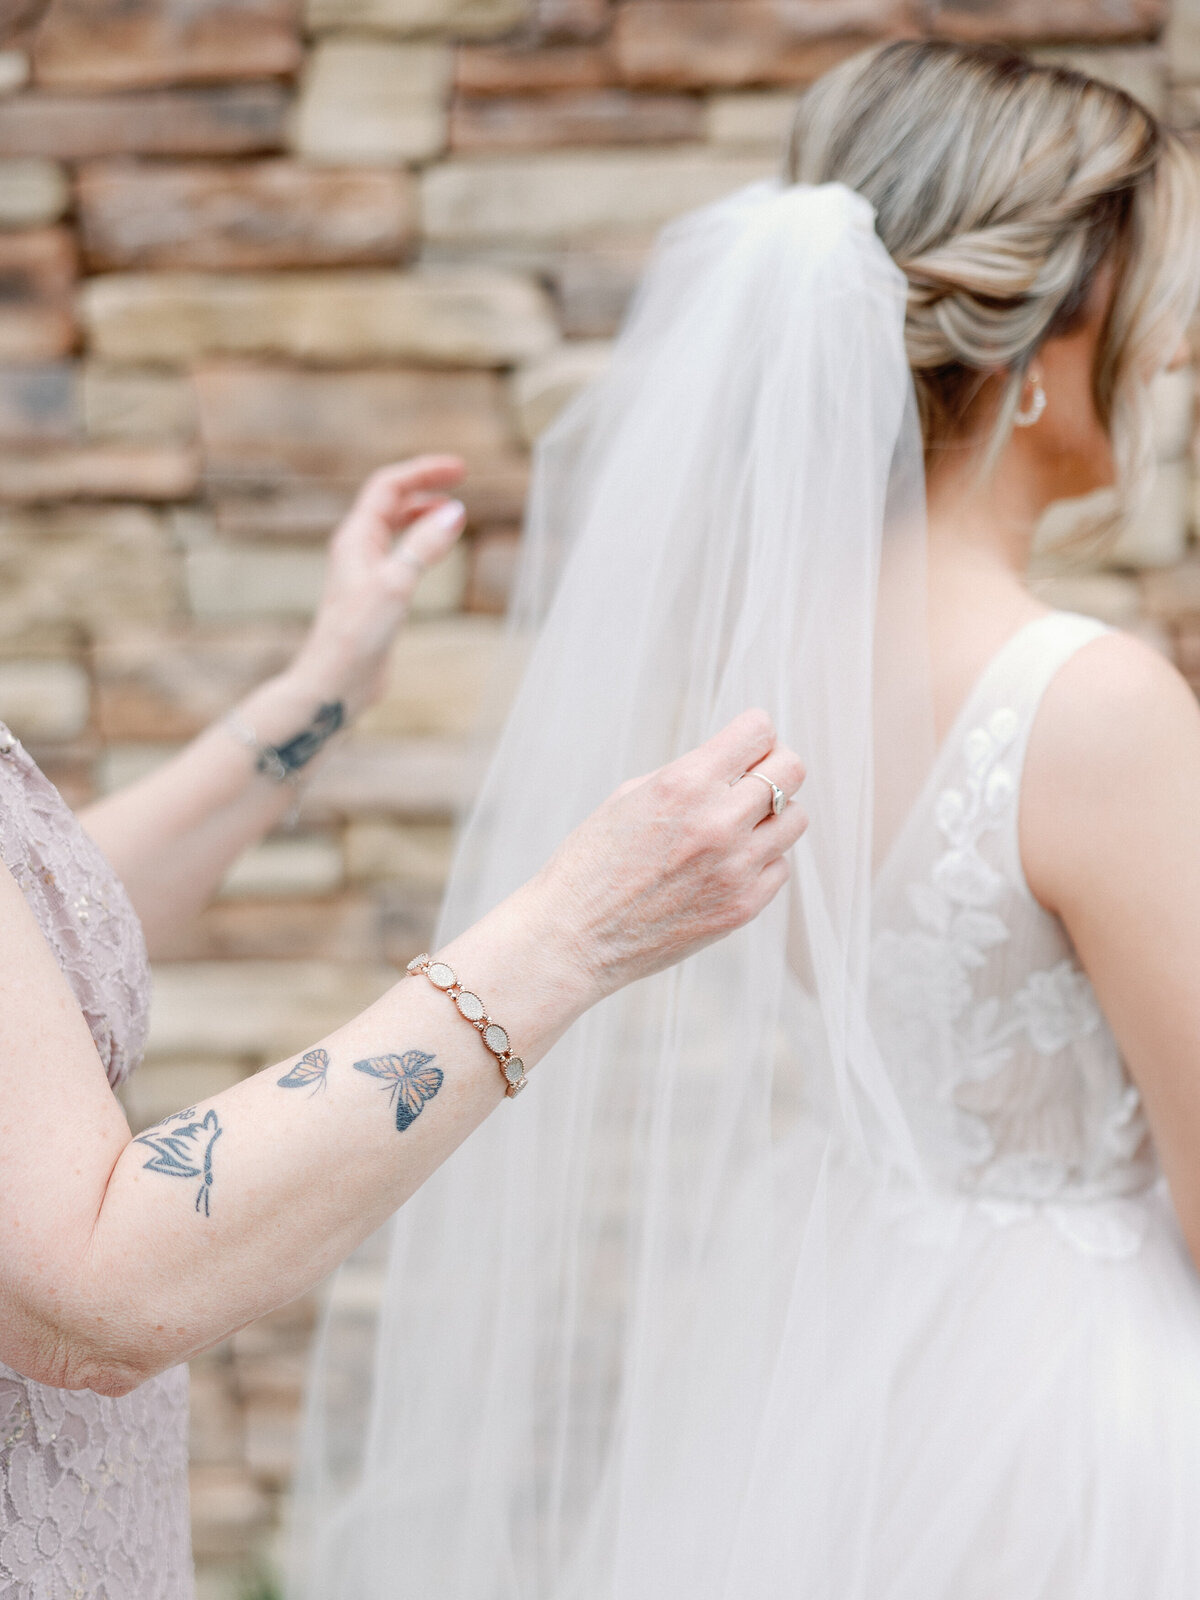 A mom helps her daughter place her wedding veil in her updo before her ceremony